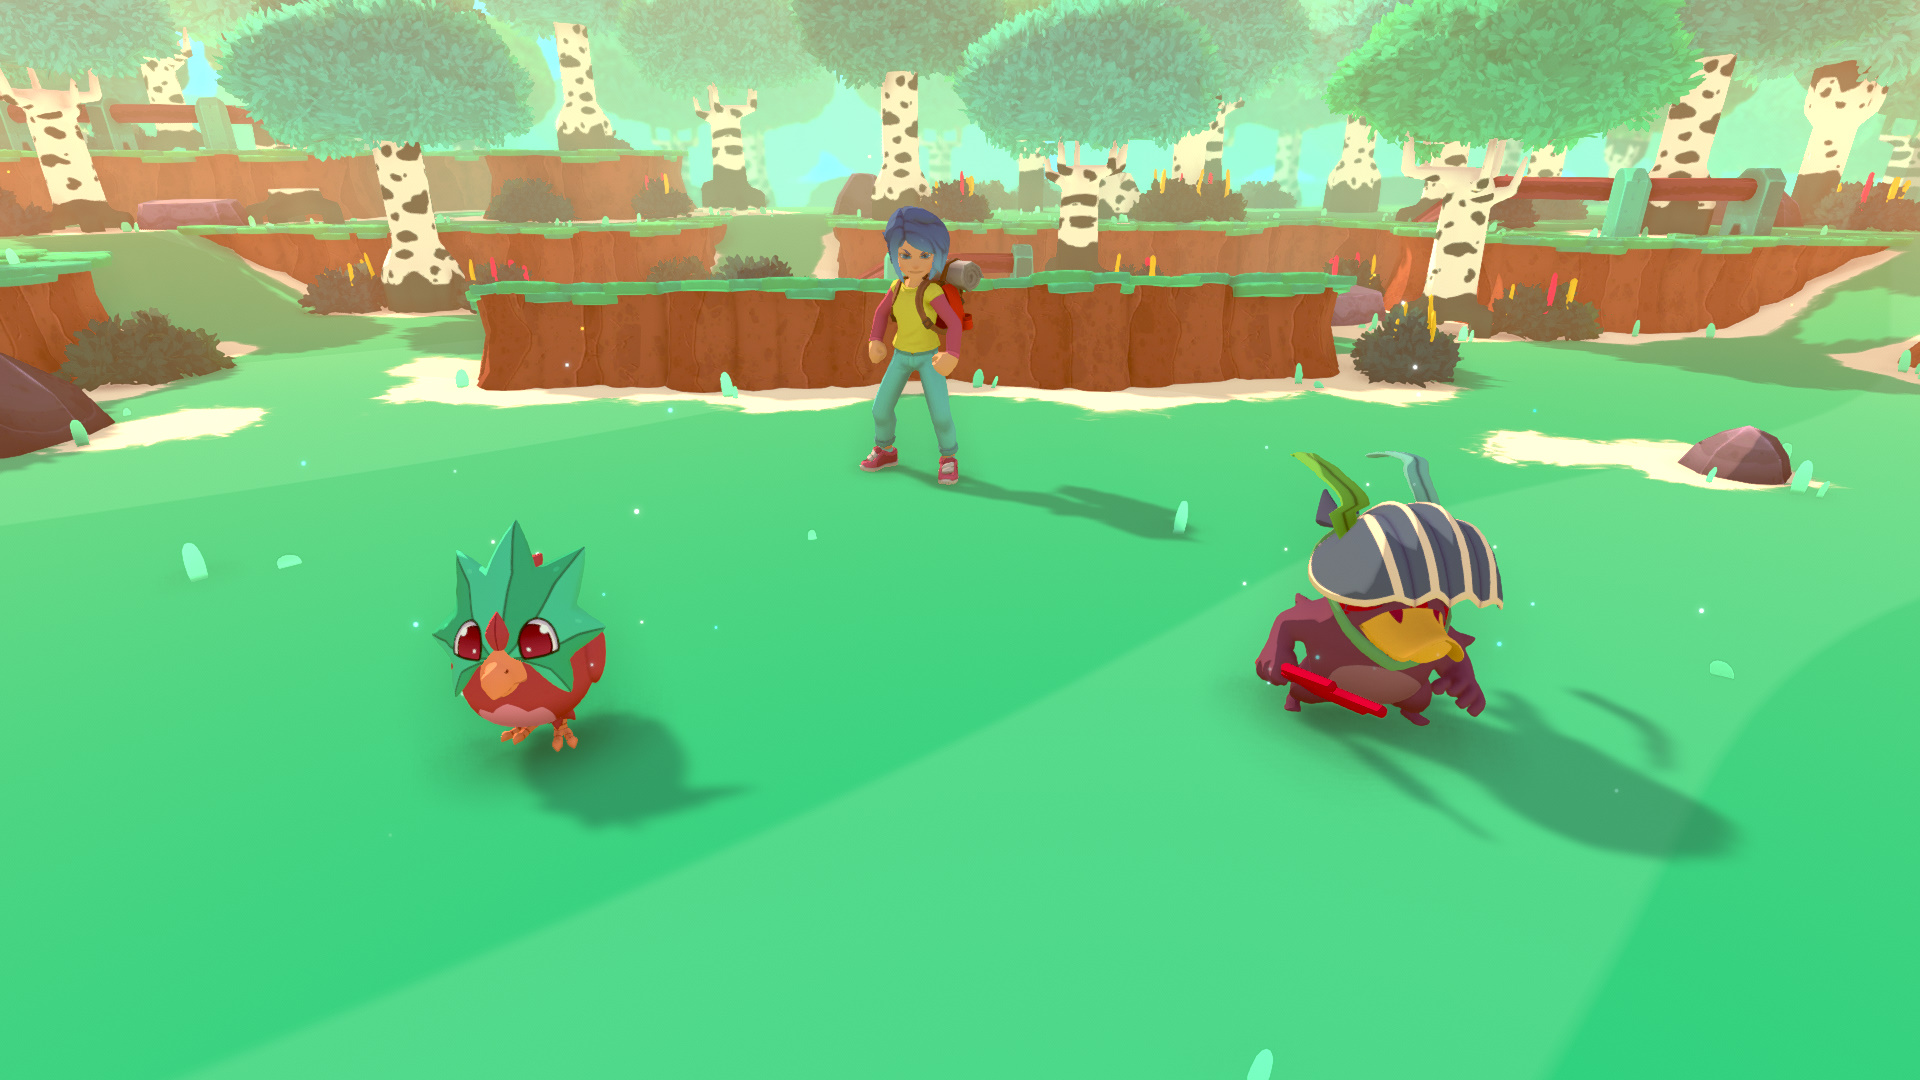 Temtem is getting a new free stand-alone version focused on PvP. : r/mmo